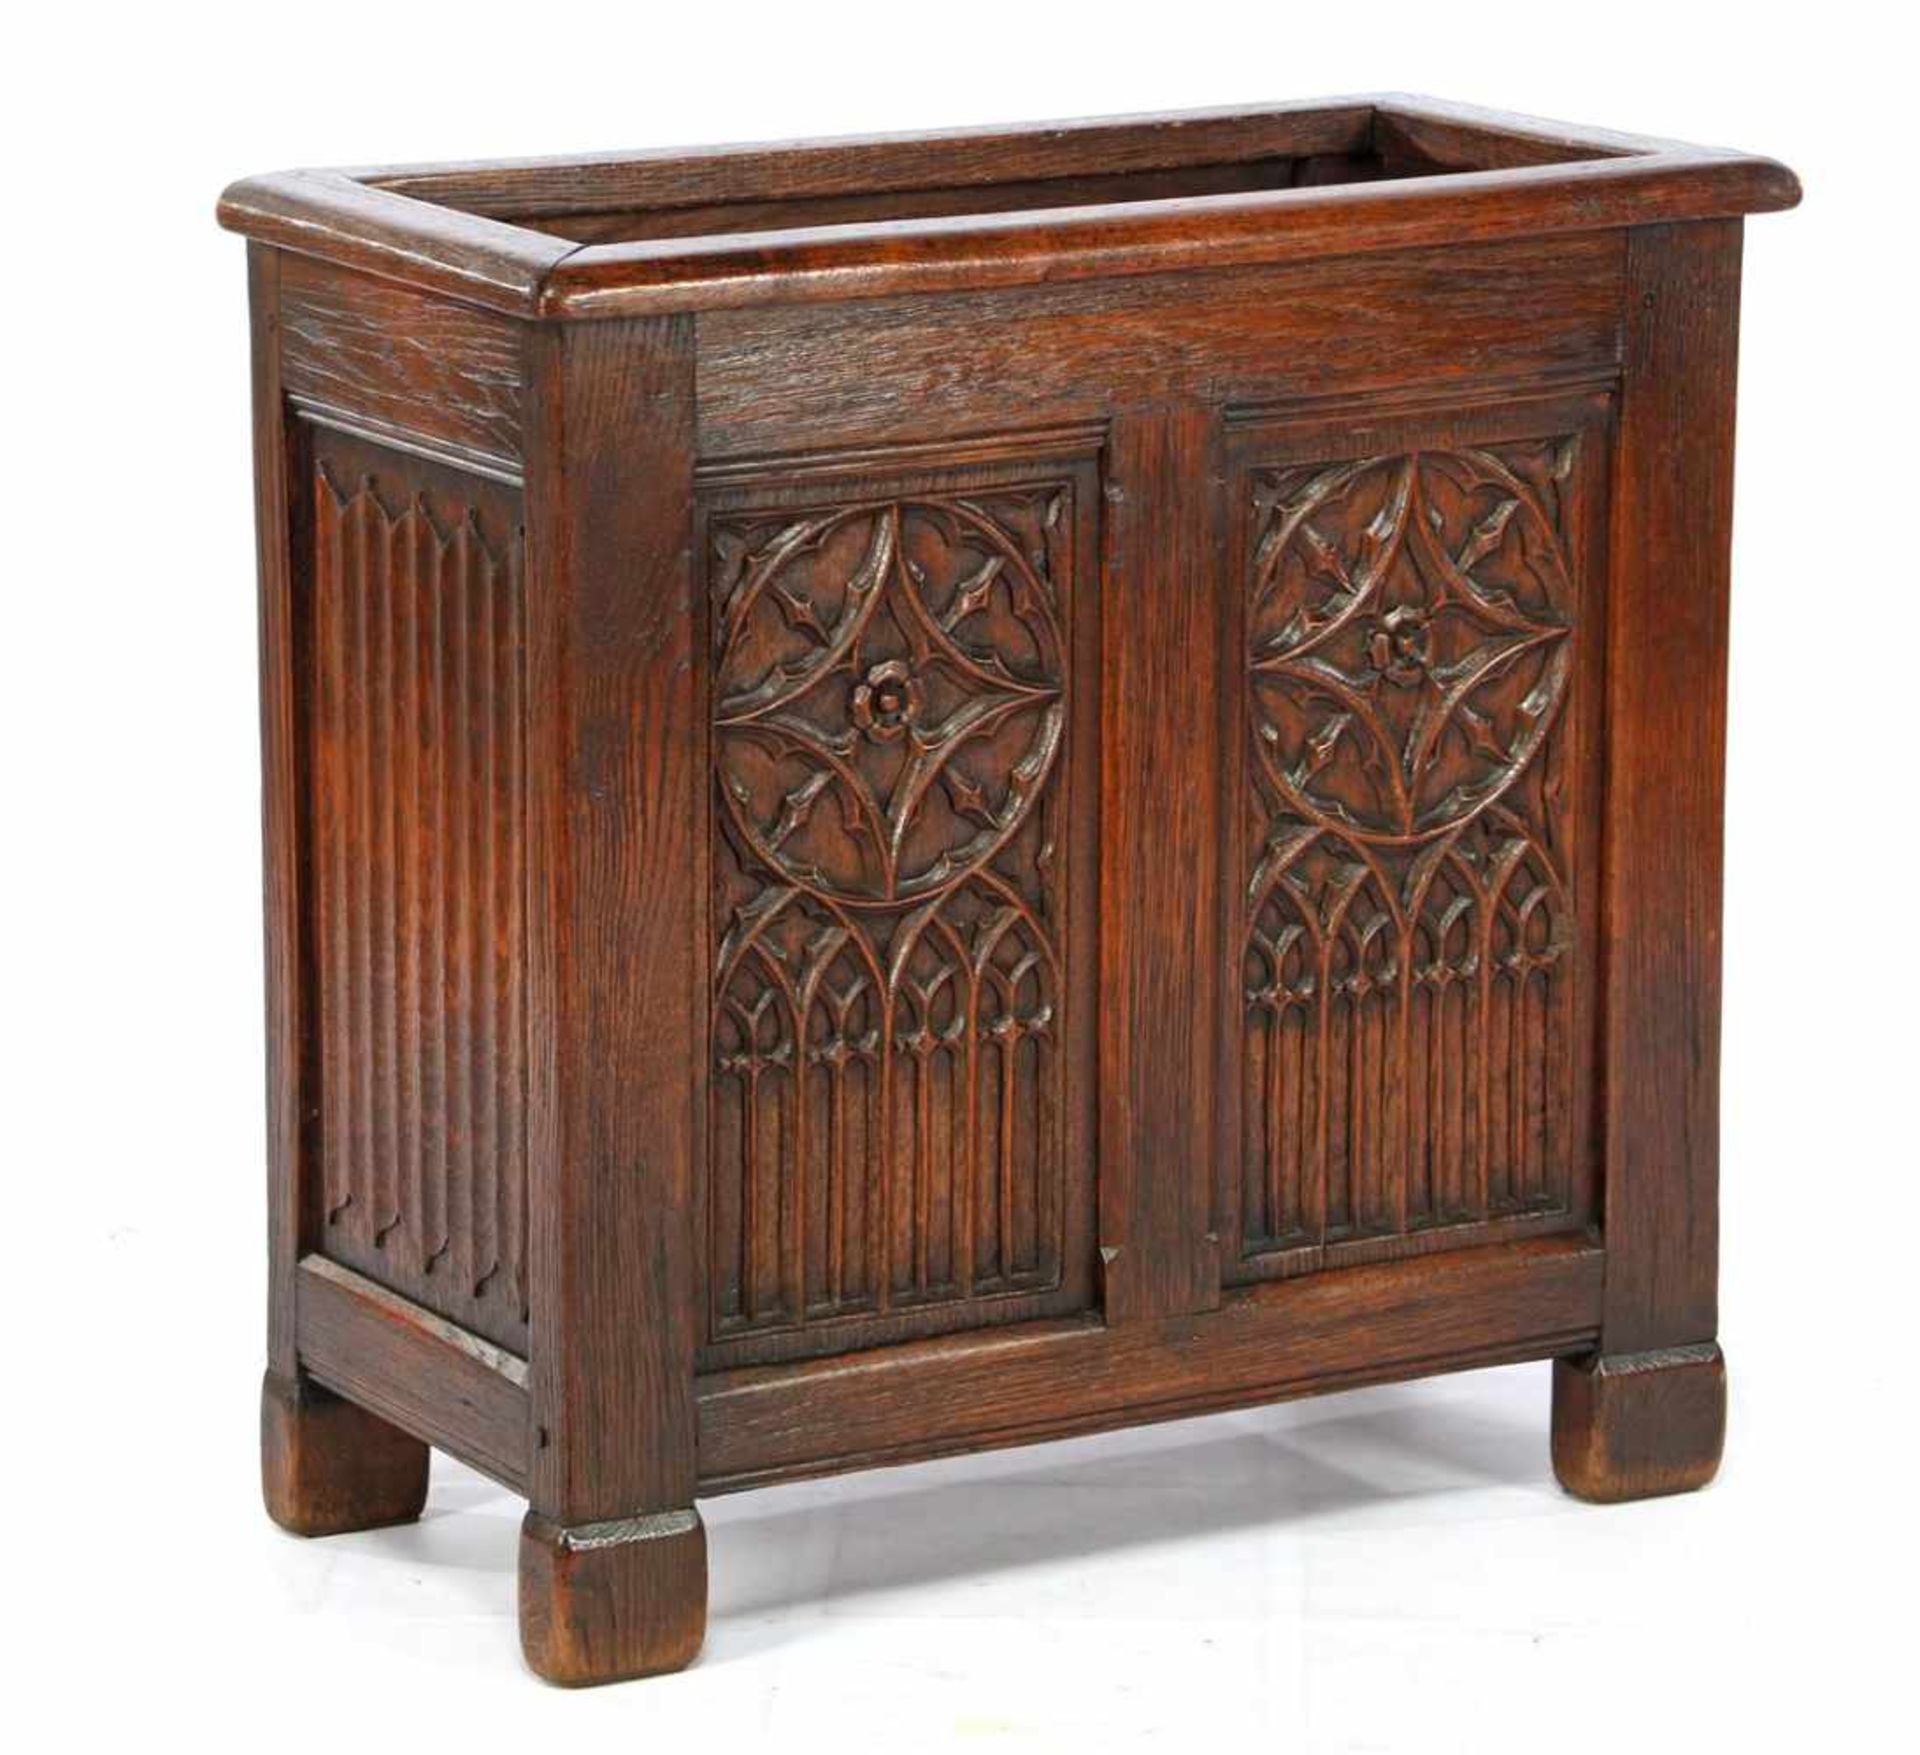 Oak holder for an umbrella stand in Neo-Gothic style, 61 cm high, 63 cm wide, 31 cm deep